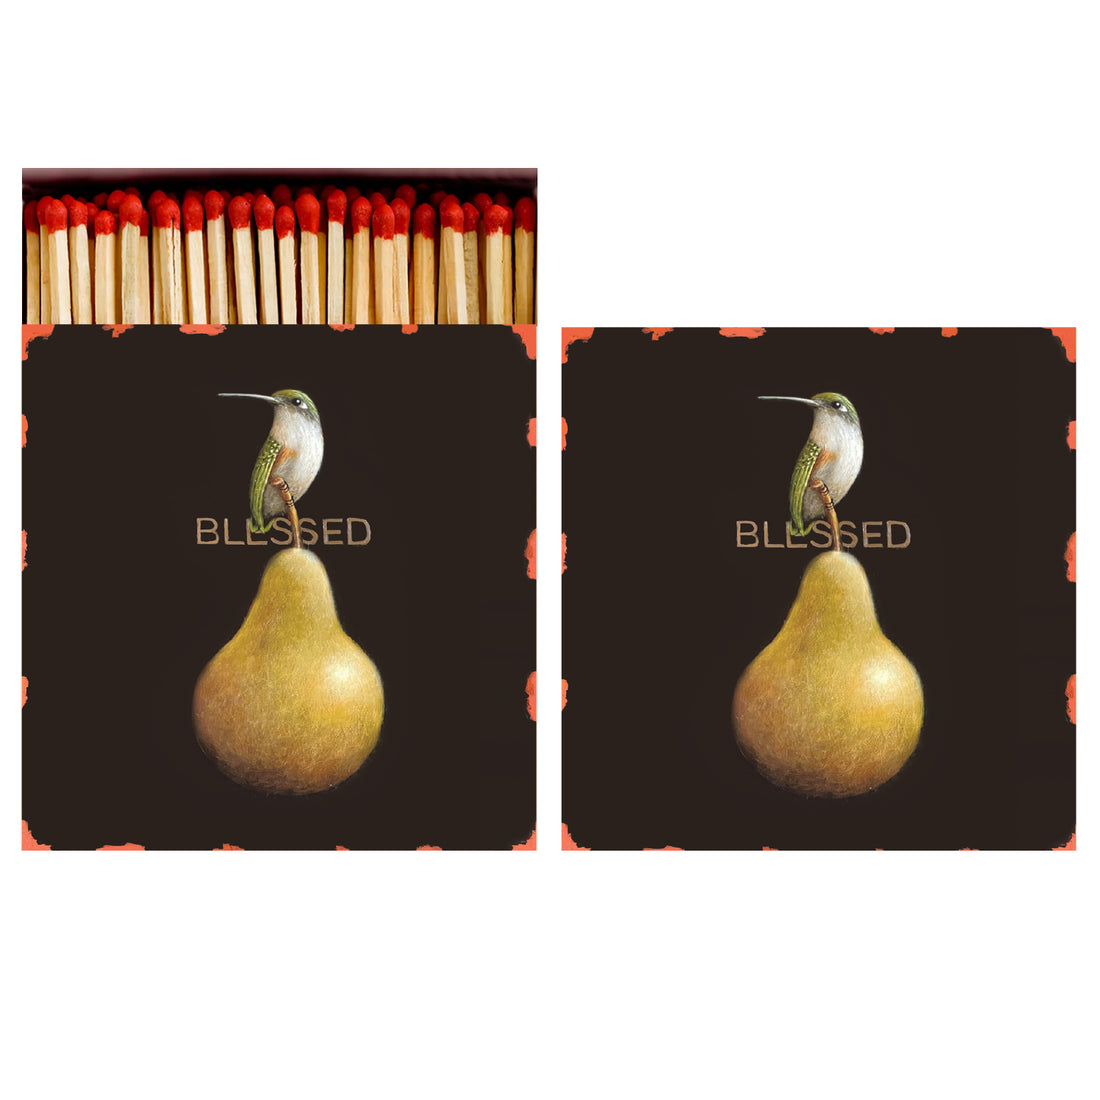 A pair of Hester &amp; Cook Blessed Matches, with a pear and the word blessed, perfect as holiday gifts.